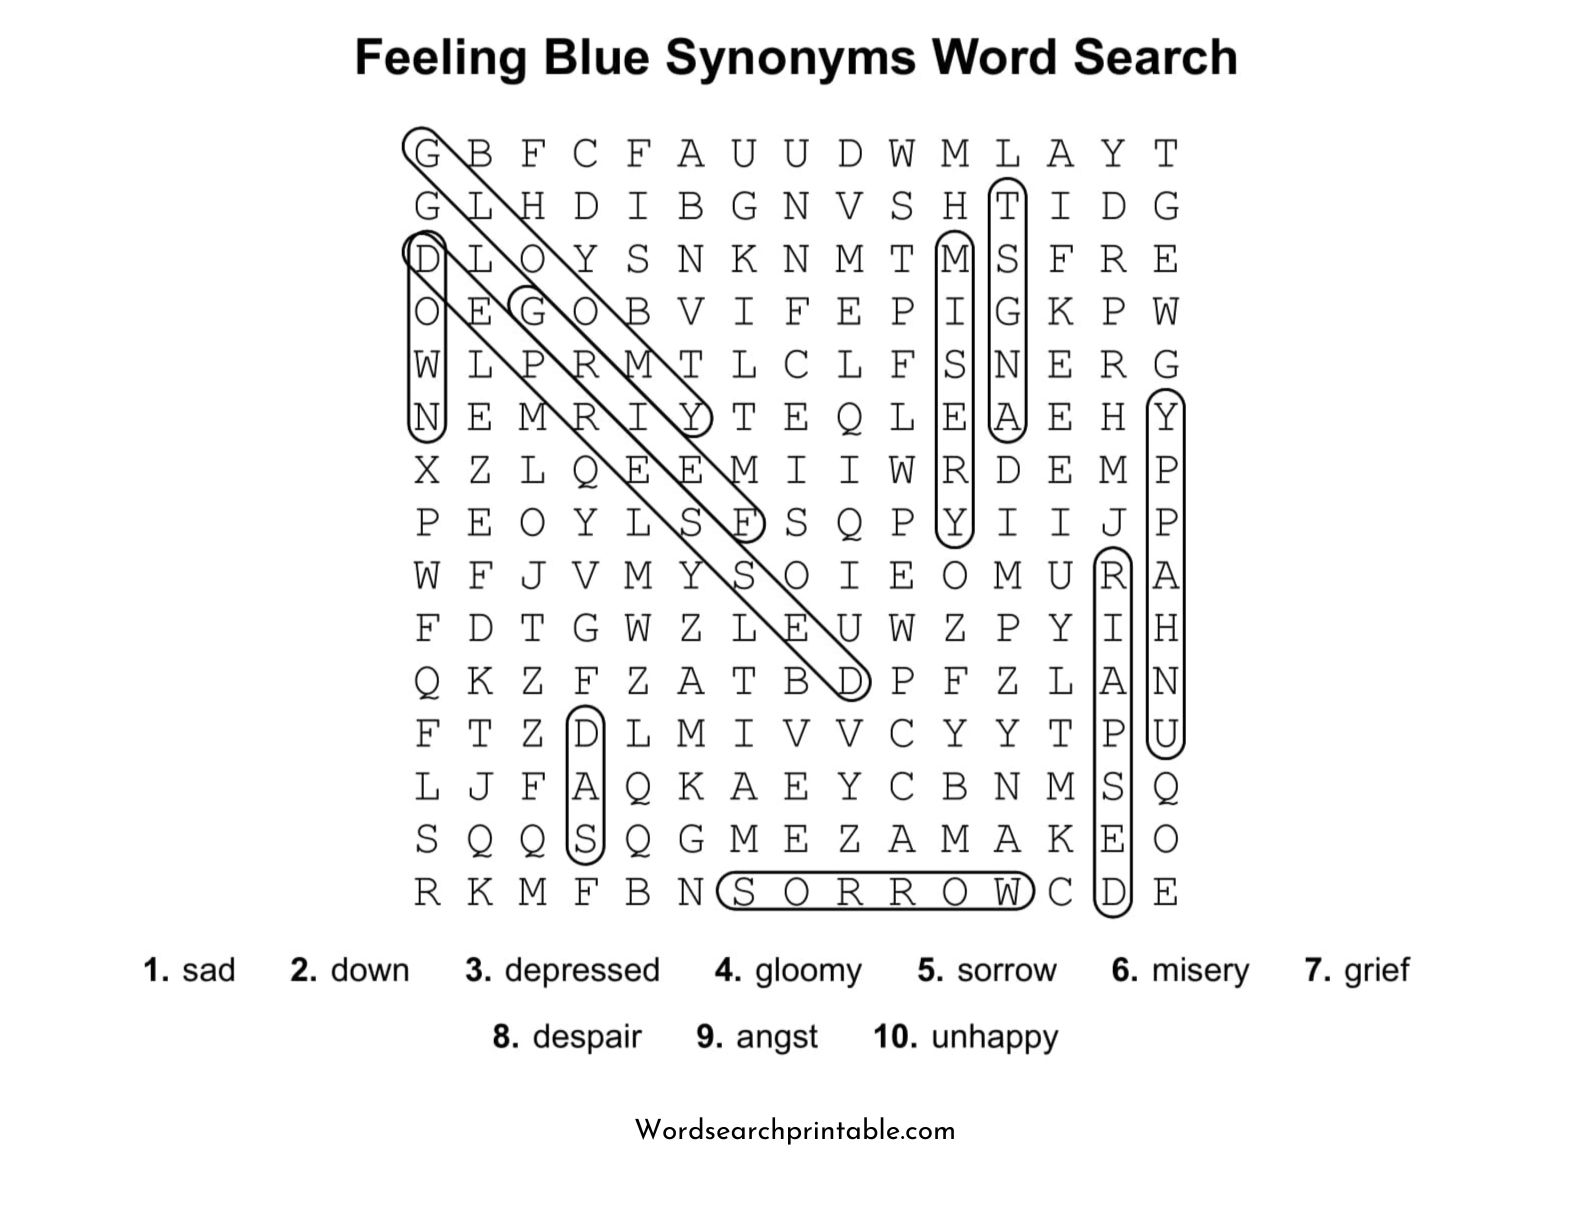 feeling blue synonyms word search puzzle solution